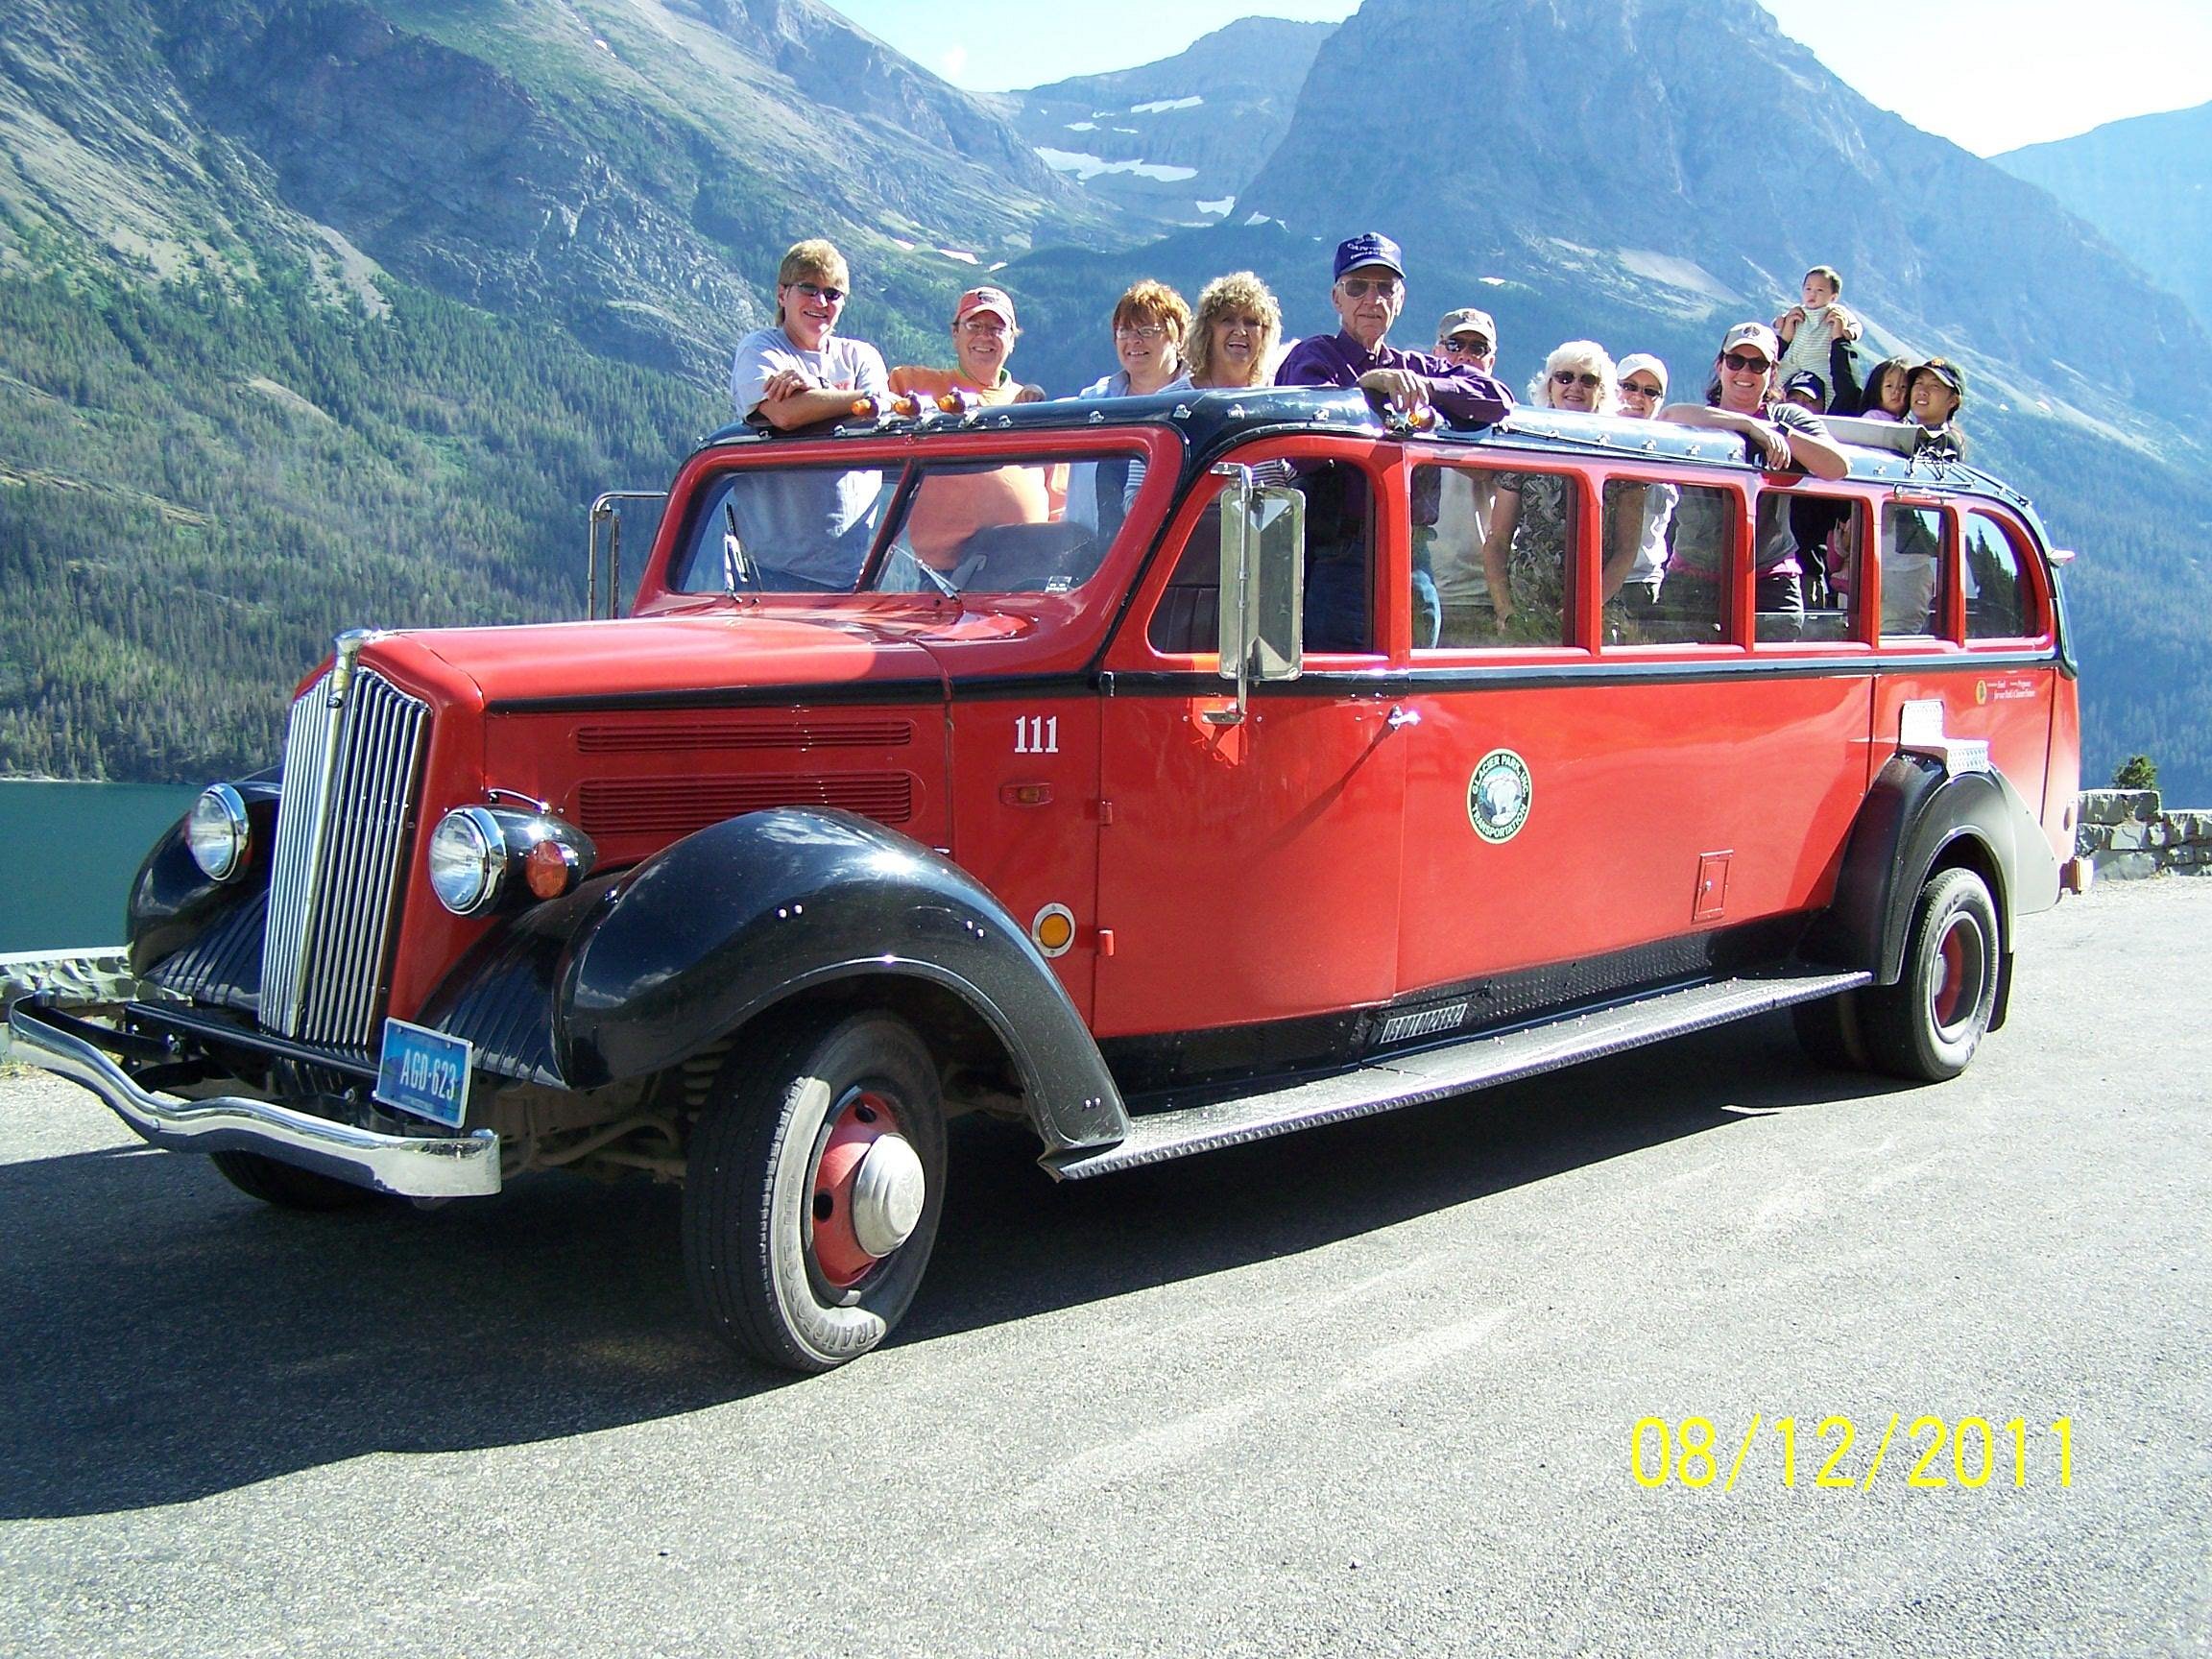 Glacier Park Red Bus Tours (Glacier National Park) All You Need to